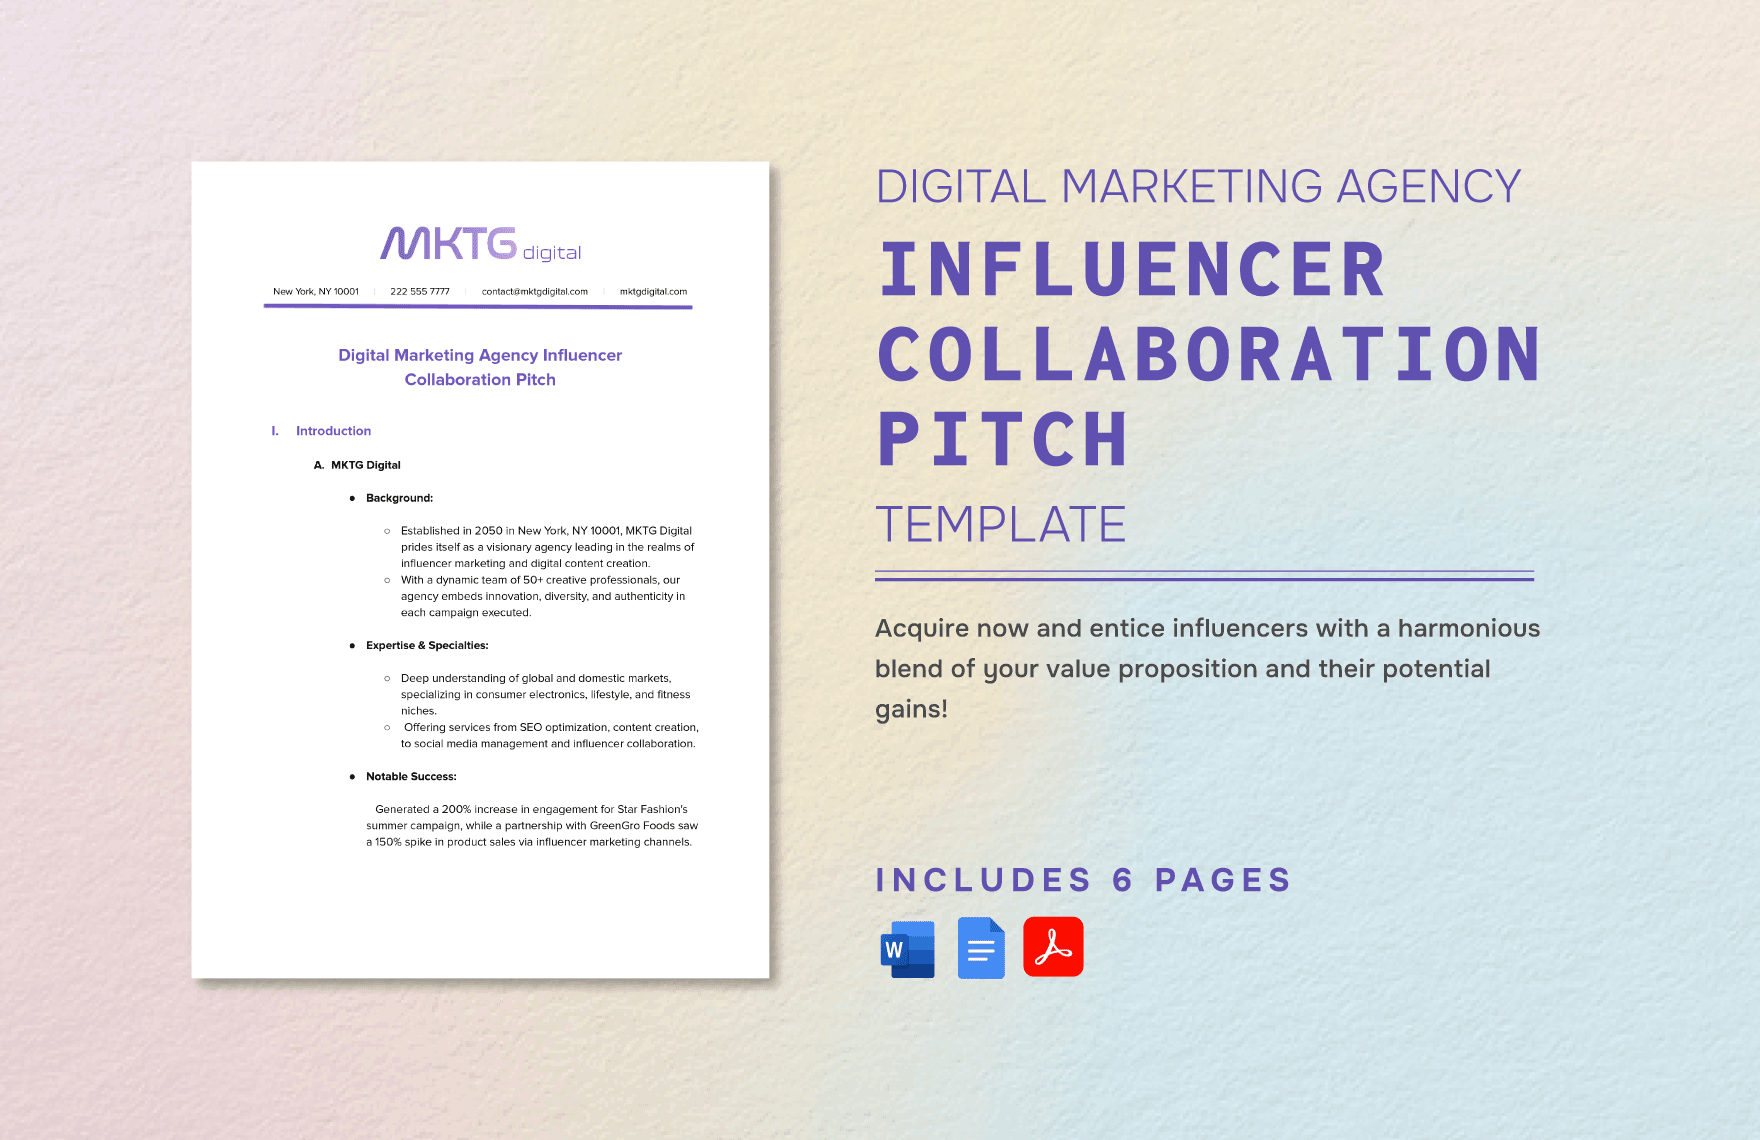 Digital Marketing Agency Influencer Collaboration Pitch Template